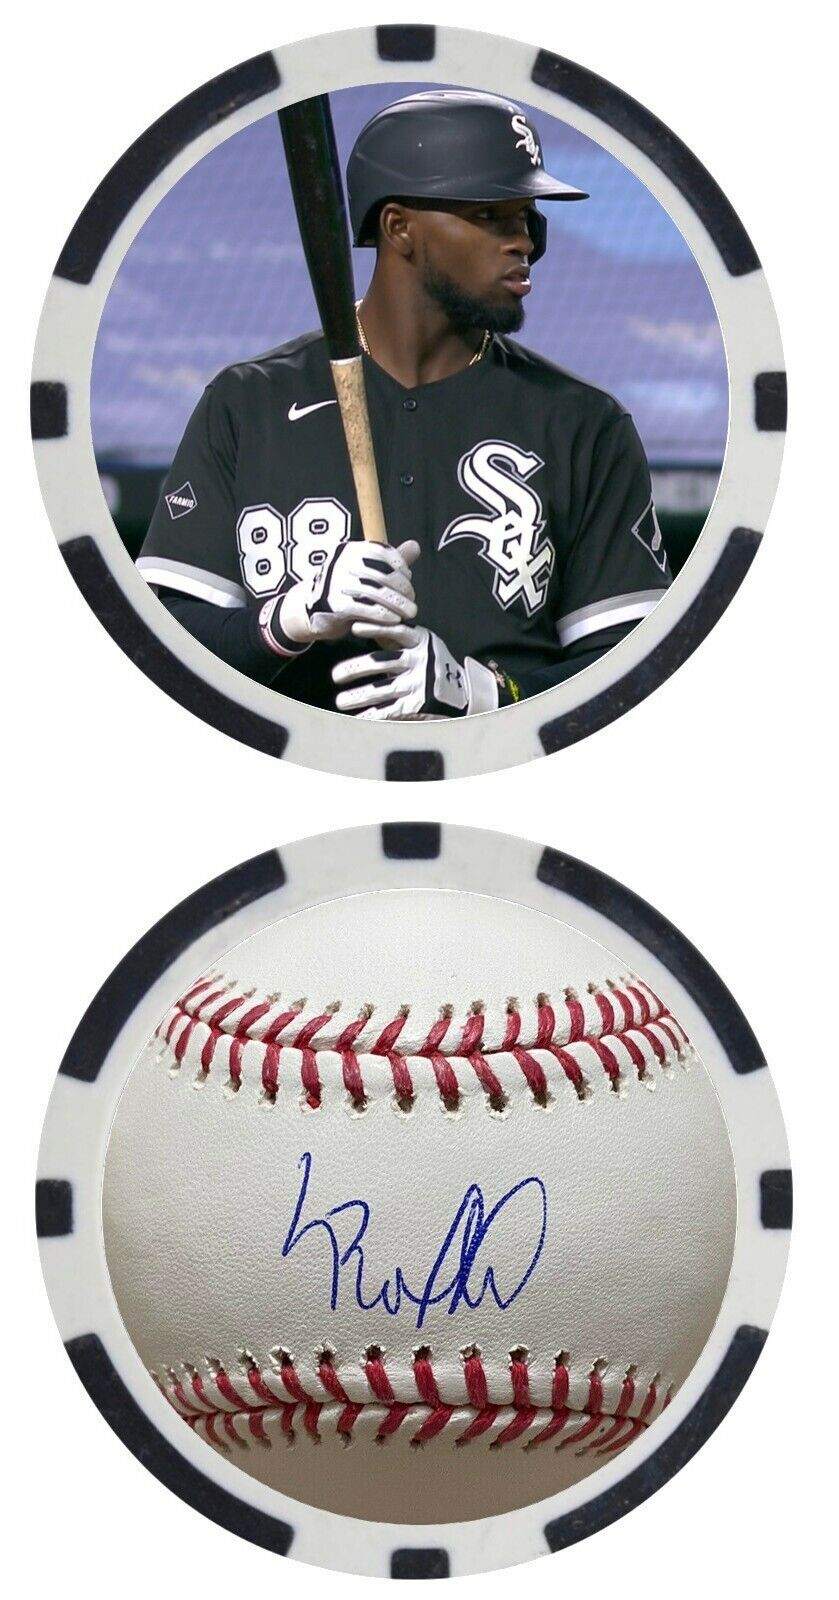 LUIS ROBERT - CHICAGO WHITE SOX - POKER CHIP -  ***SIGNED***